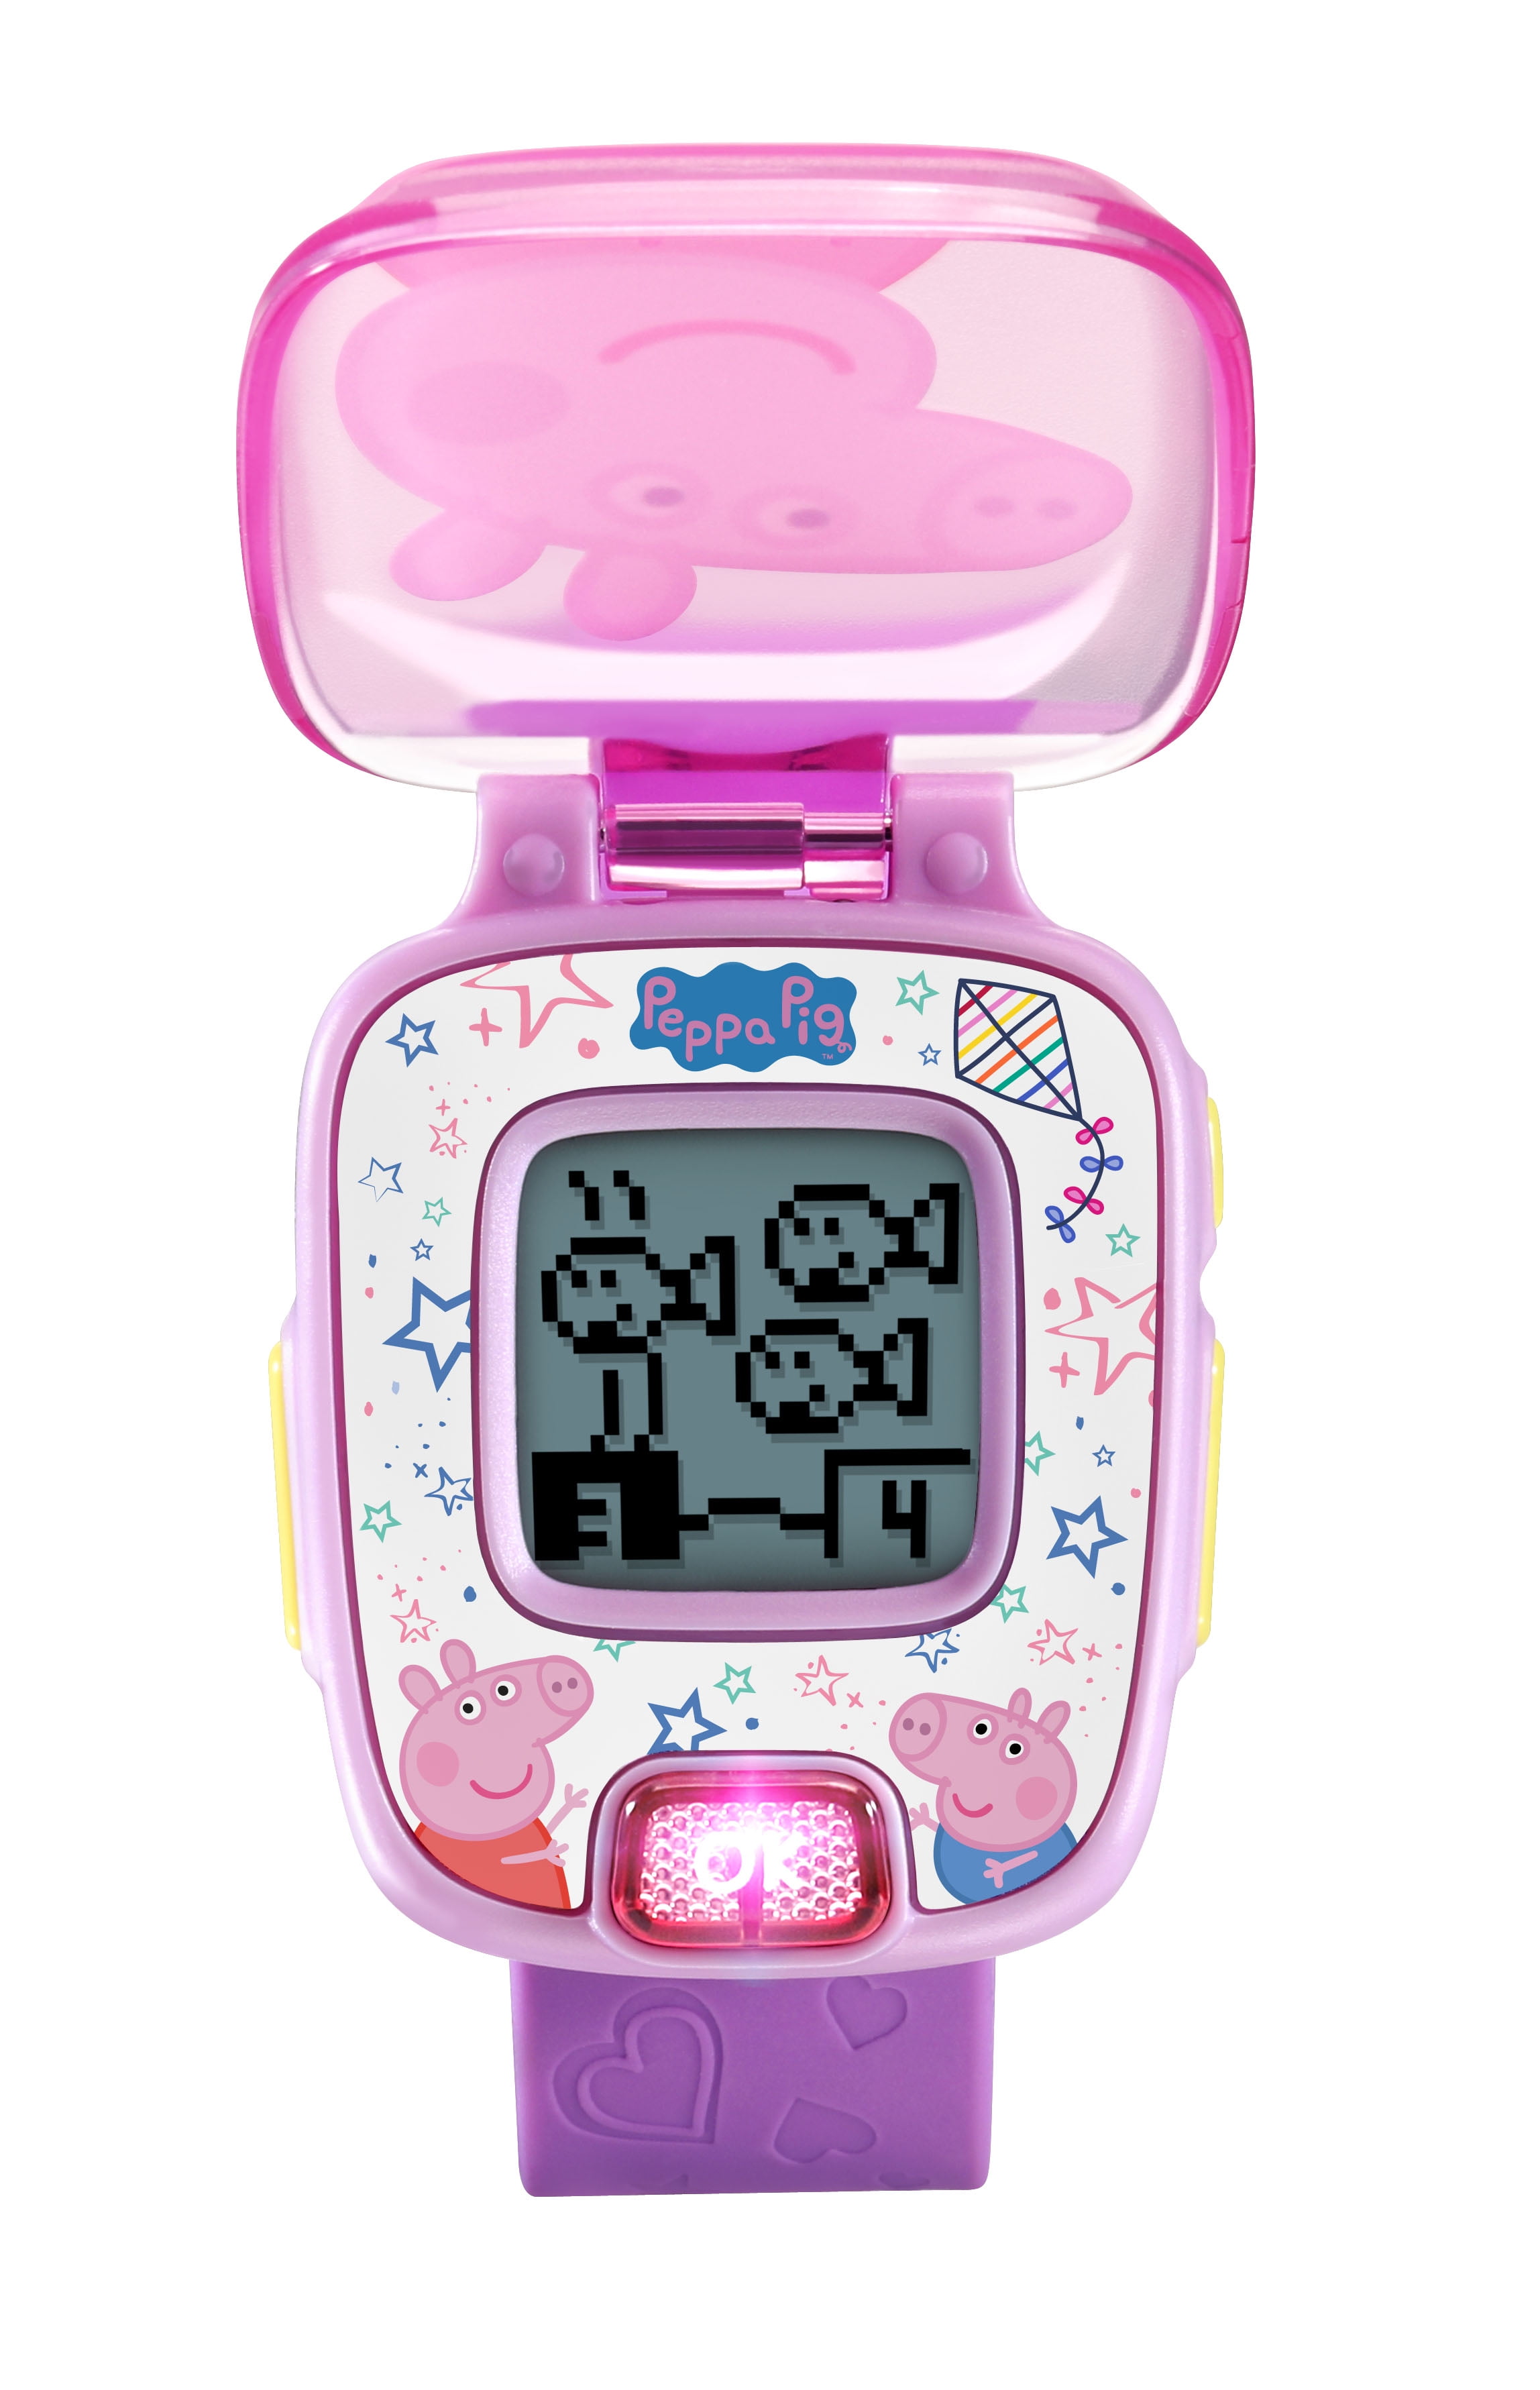 Preschool Learning Toy with Numbers, Vtech Peppa Pig Watch Interactive Toy 